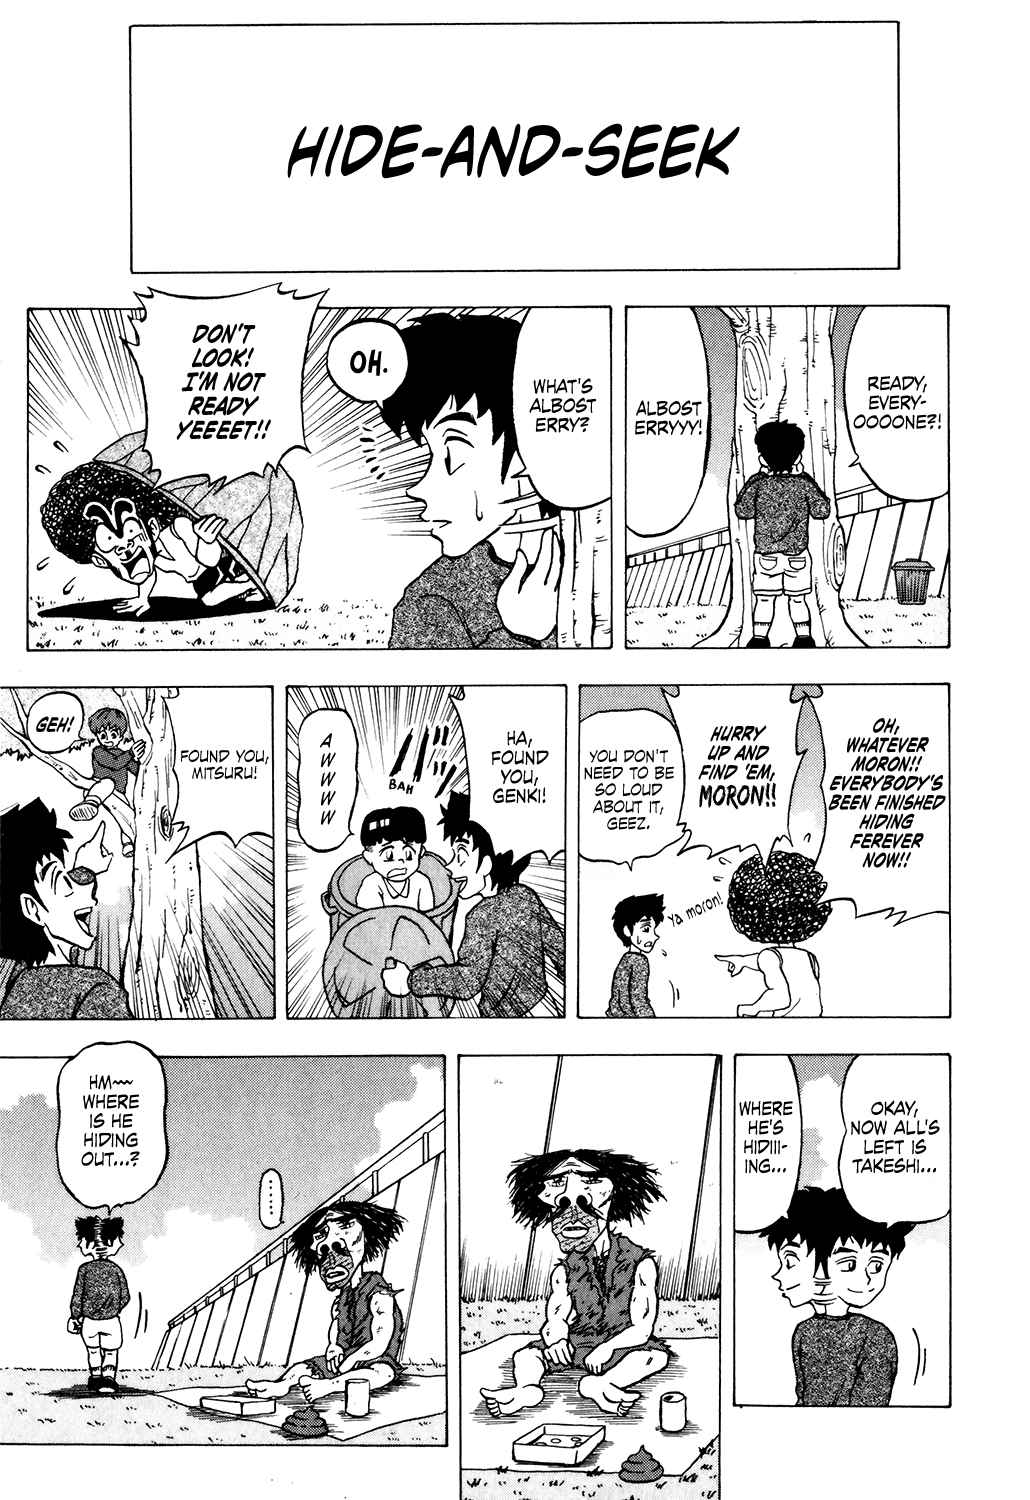 Seikimatsu Leader Den Takeshi! Vol. 2 Ch. 21 Takeshi's Laugh Your Ass Off Special '97